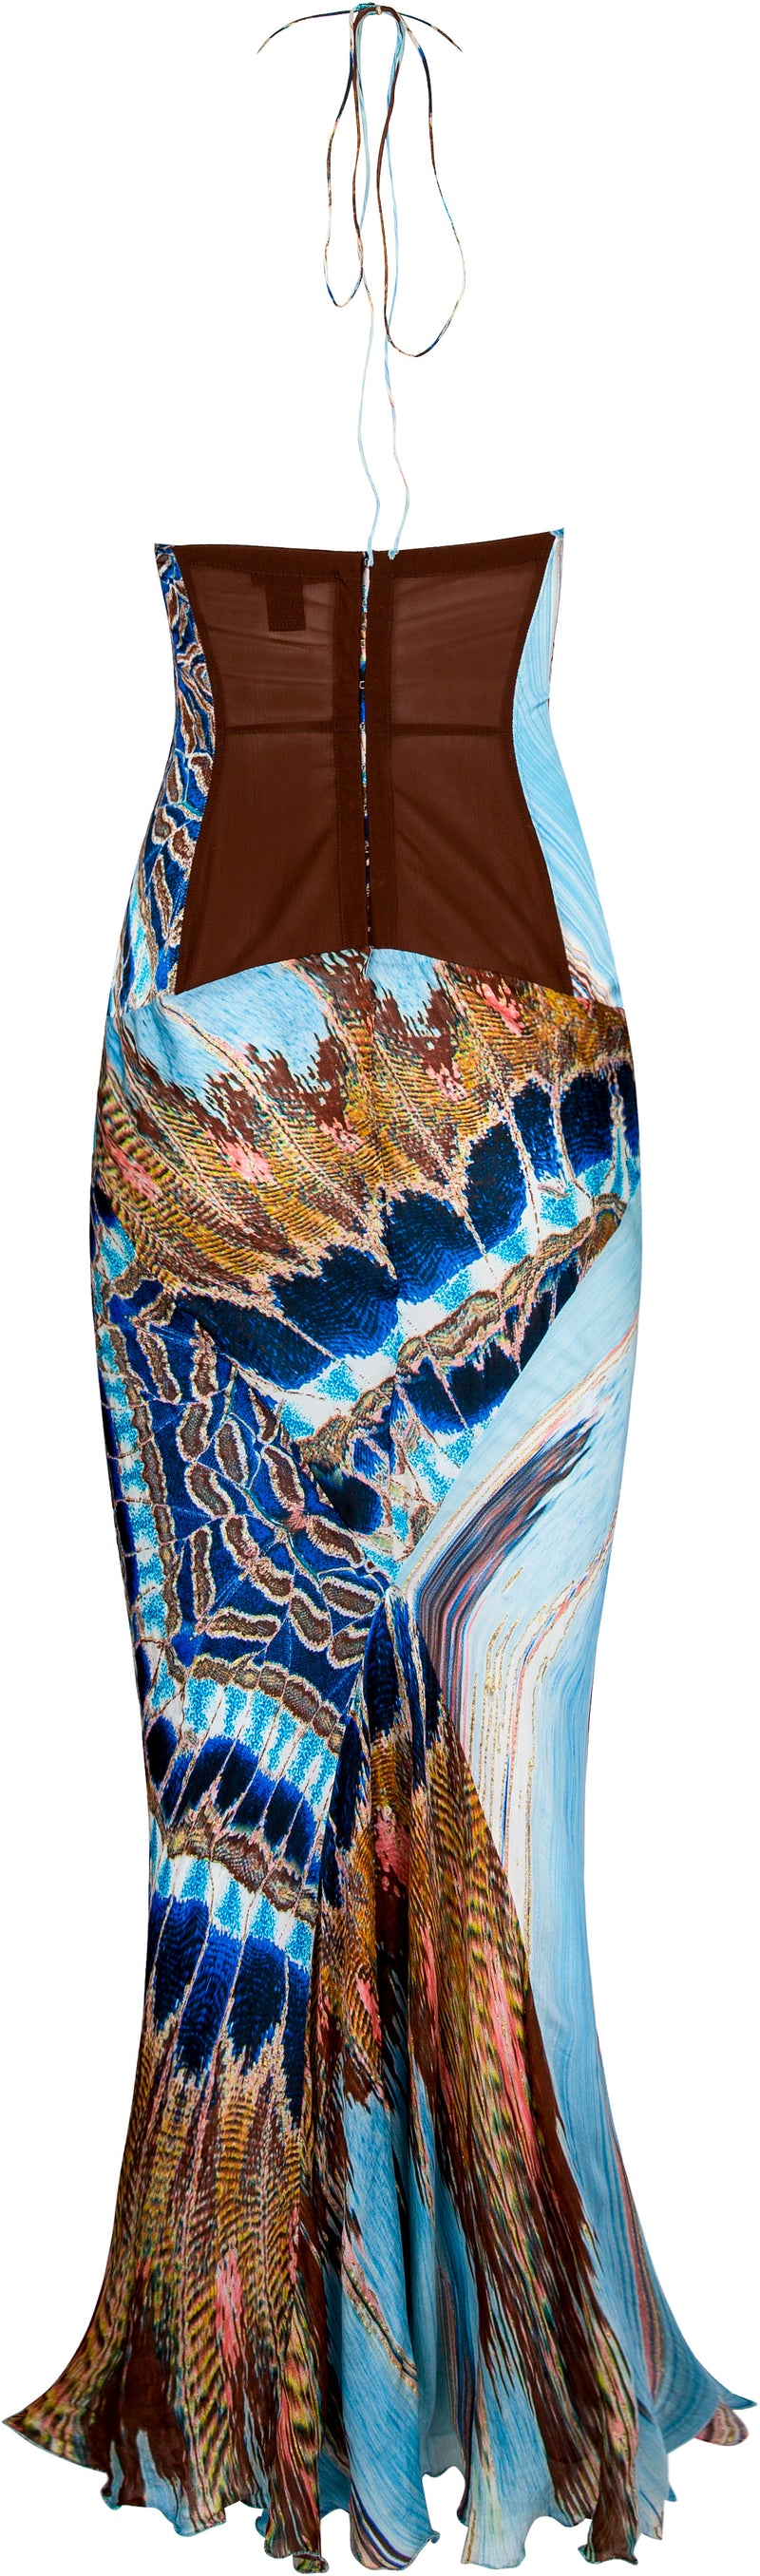 Roberto Cavalli Spring 2004 Silk Printed Corseted Gown